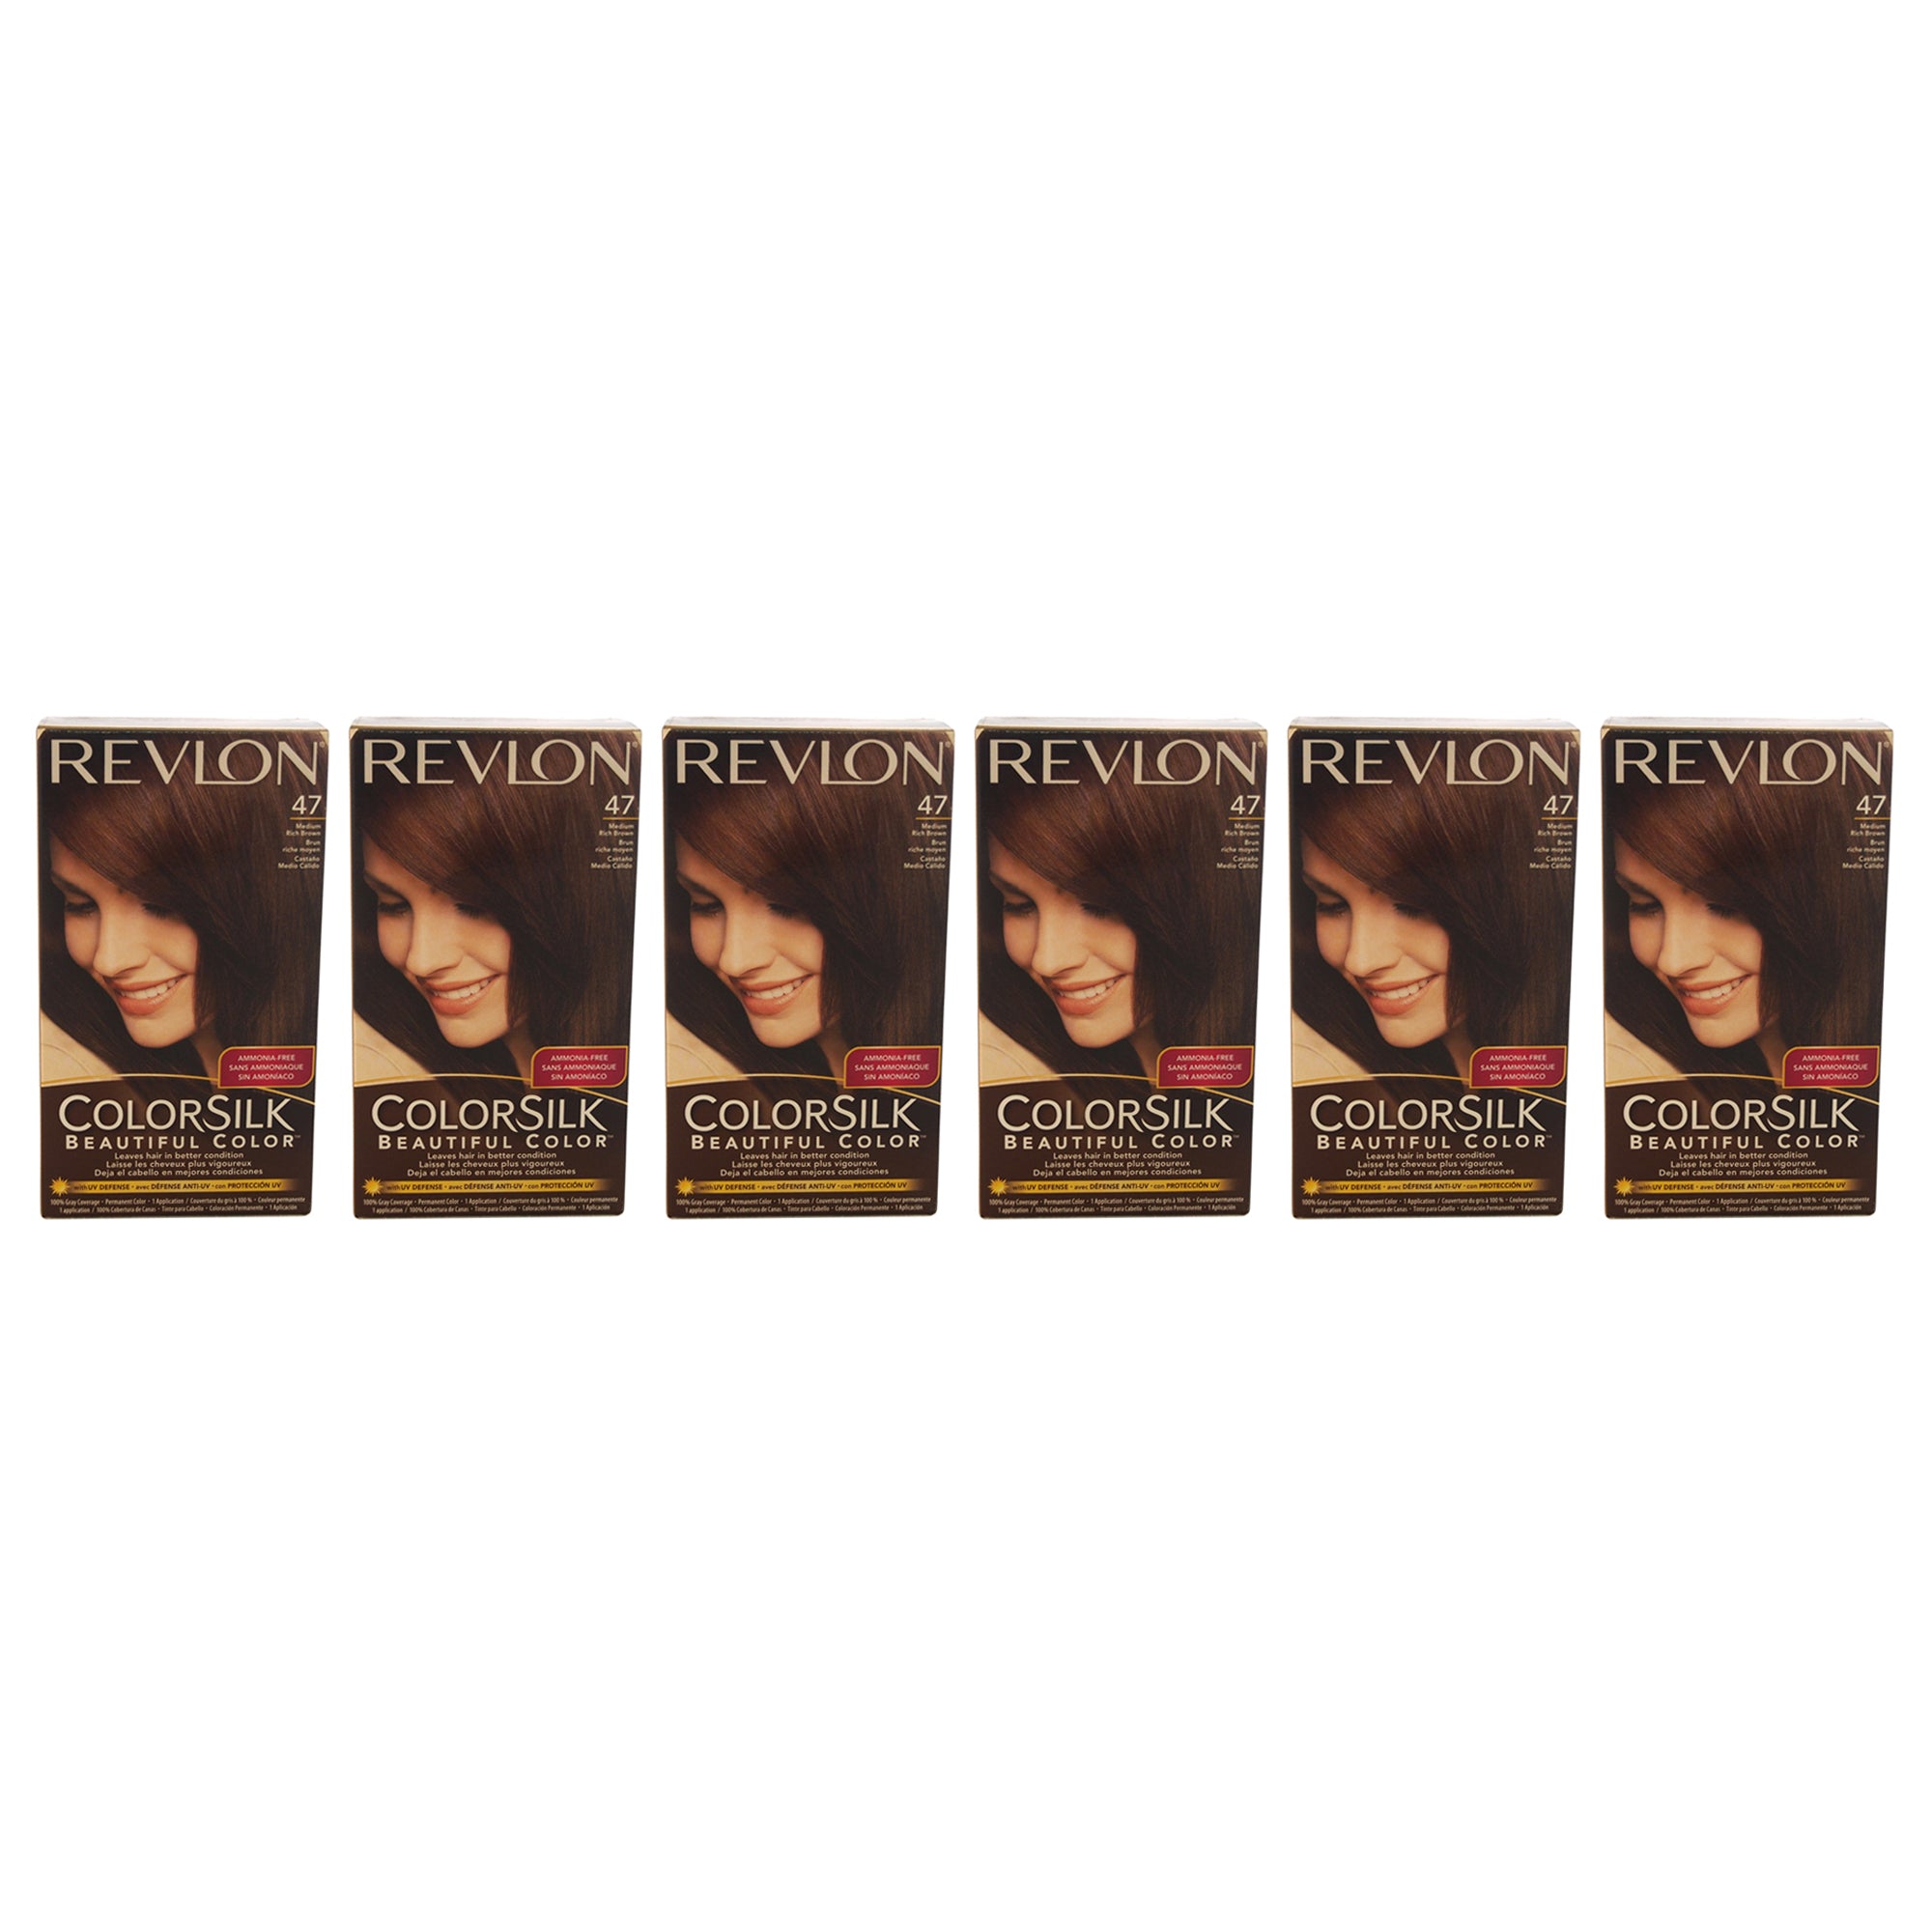 colorsilk Beautiful Color - 47 Medium Rich Brown by Revlon for Unisex - 1 Application Hair Color - Pack of 6